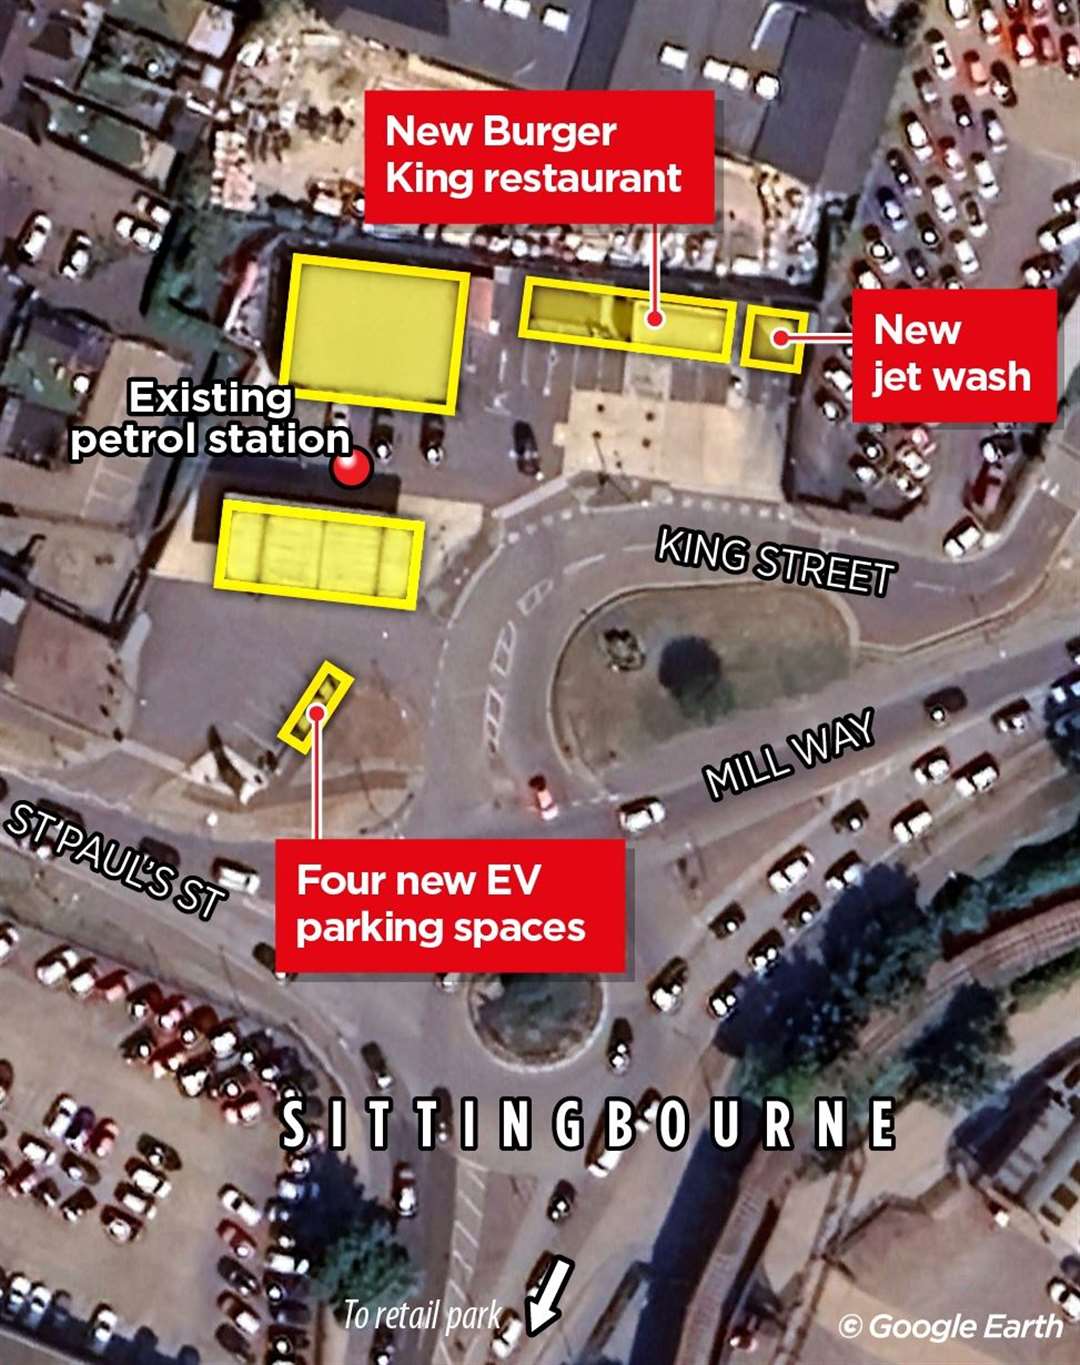 Where the Burger King would be located if the plans are approved